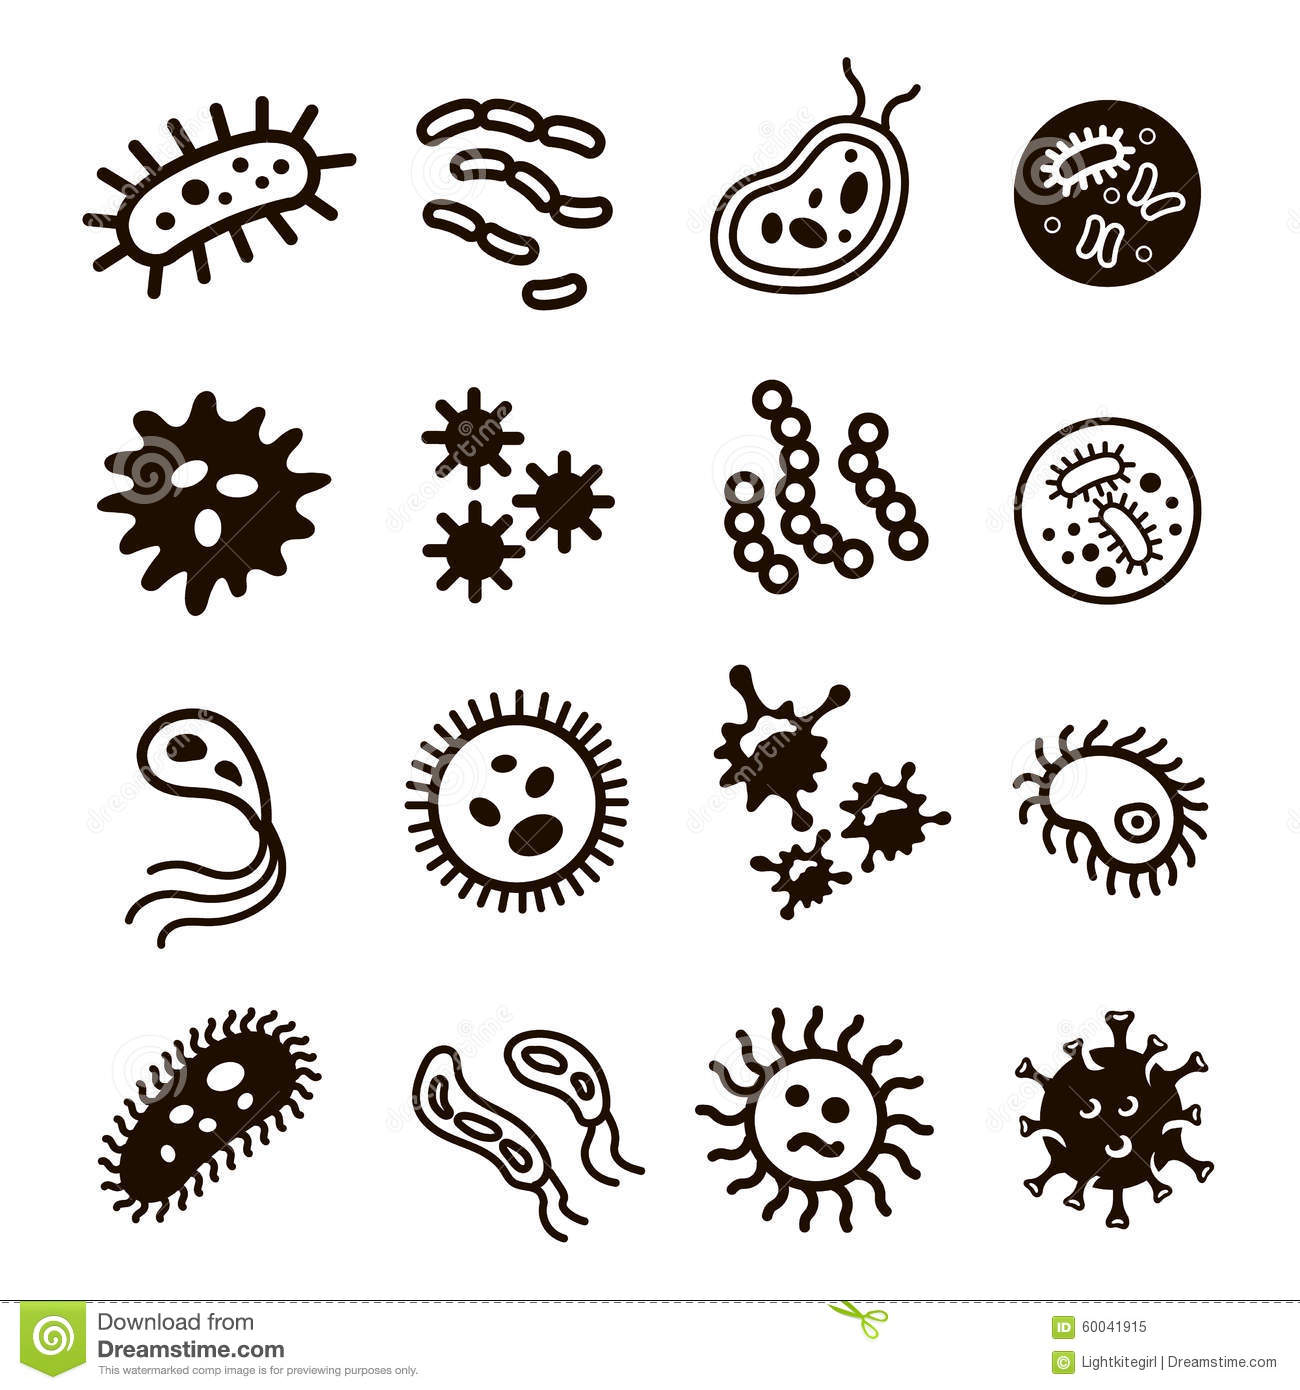 788 Bacteria free clipart.